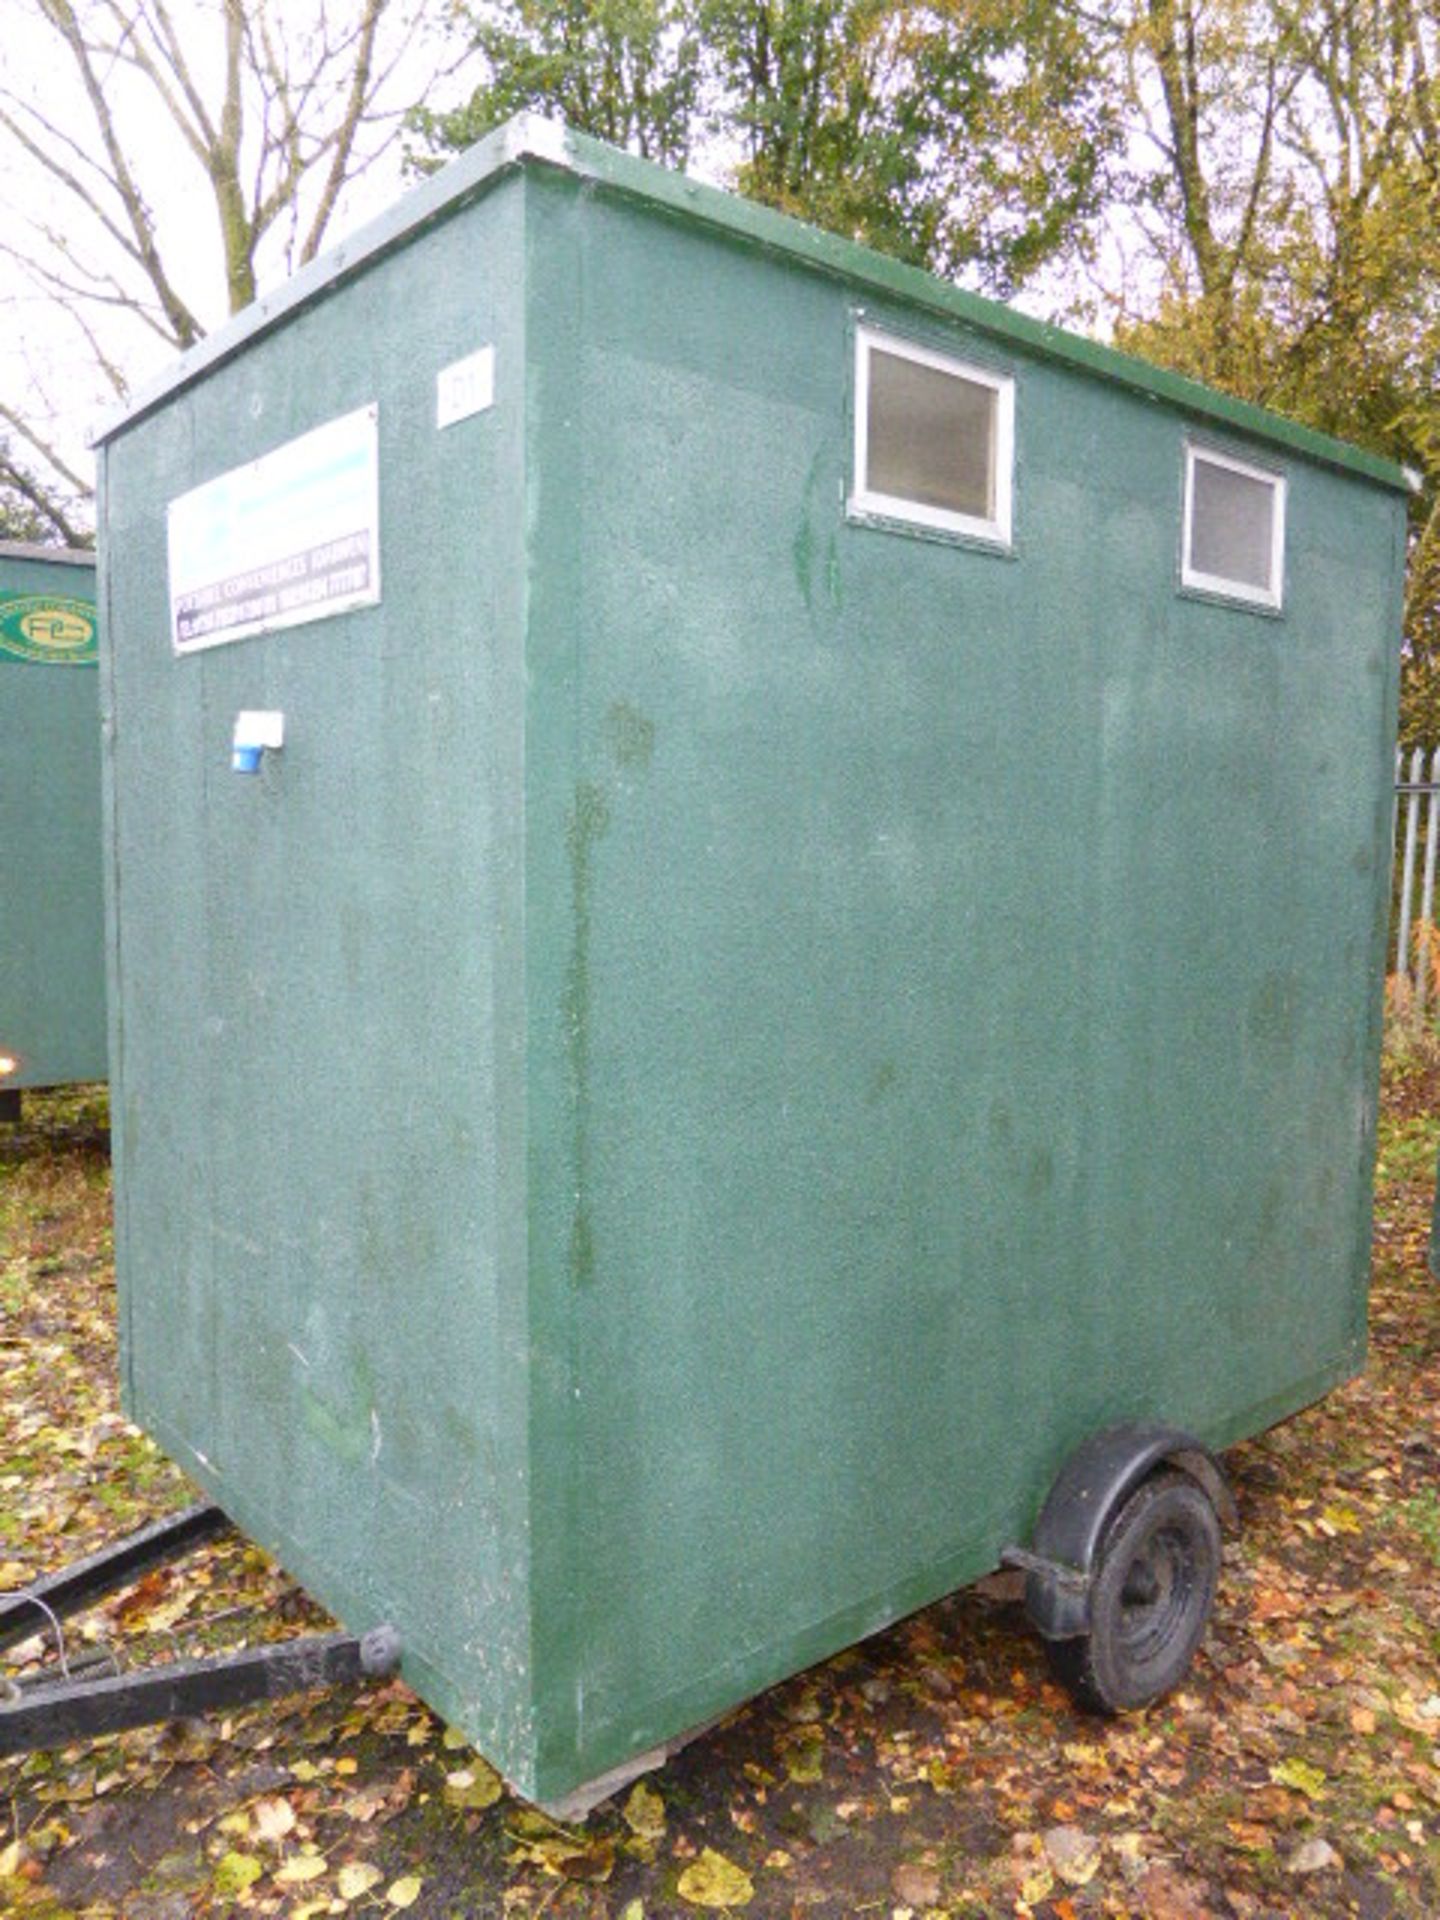 Single axle unisex disable toilet trailer with ramp access and handrails in green rough cast - Image 8 of 8